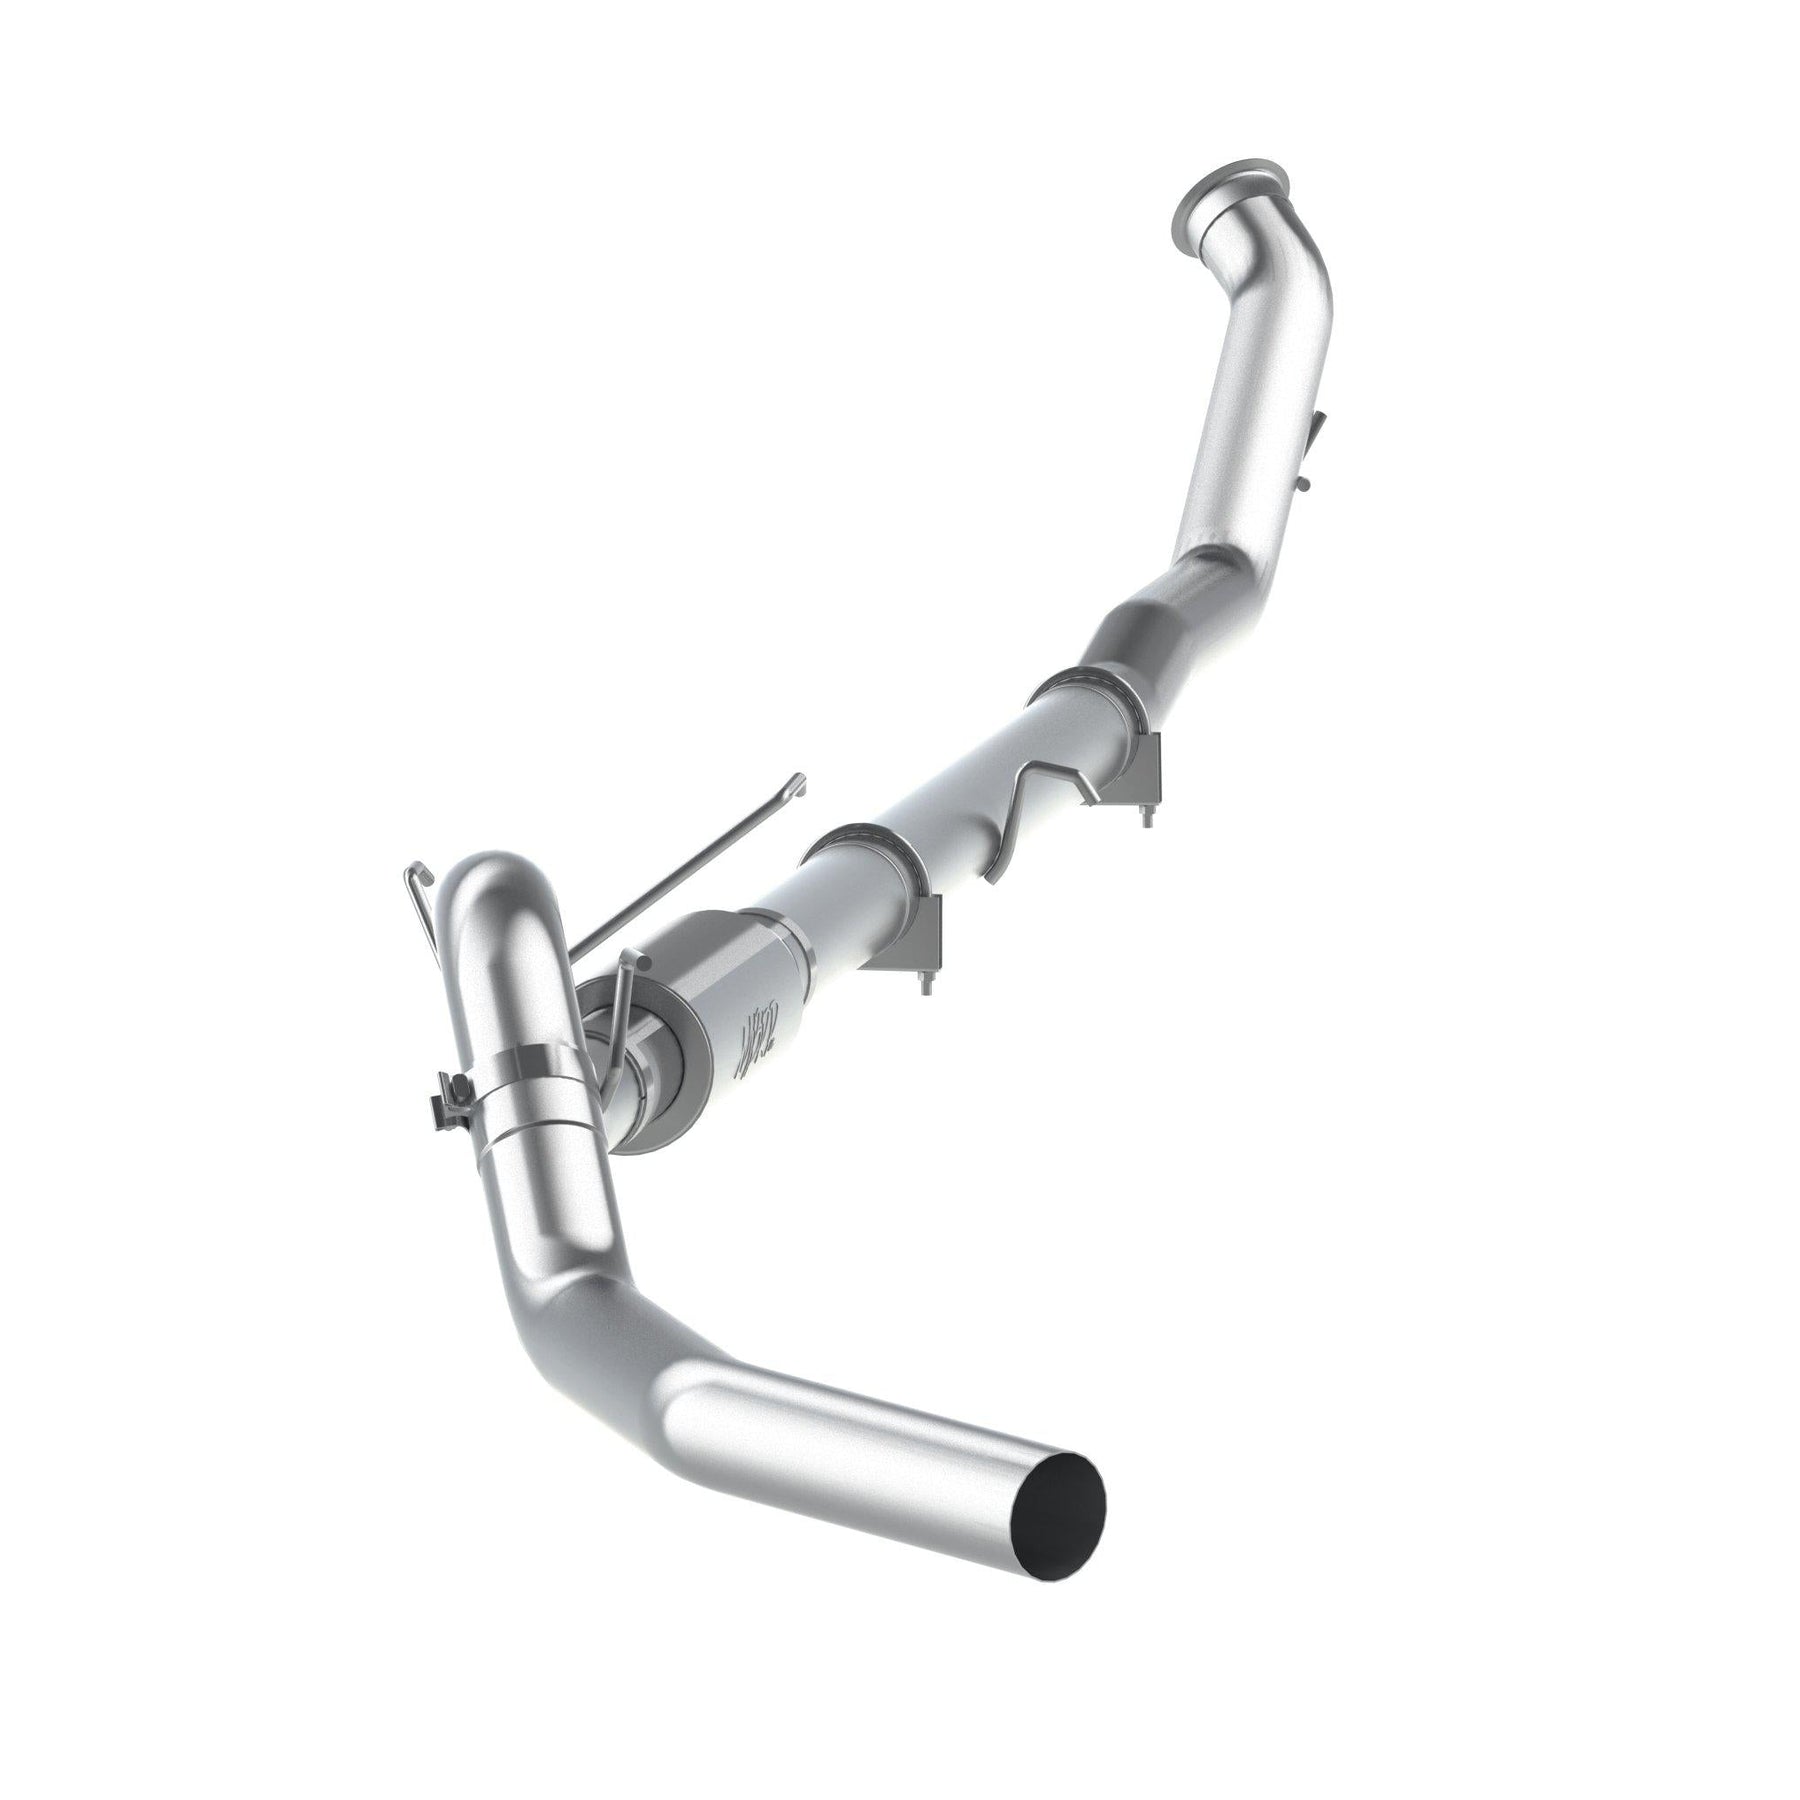 2010-2012 Cummins 4" Turboback Exhaust w/ Muffler (C6142P)-Turbo Back Exhaust System-P1 Performance Products-C6142P-Dirty Diesel Customs